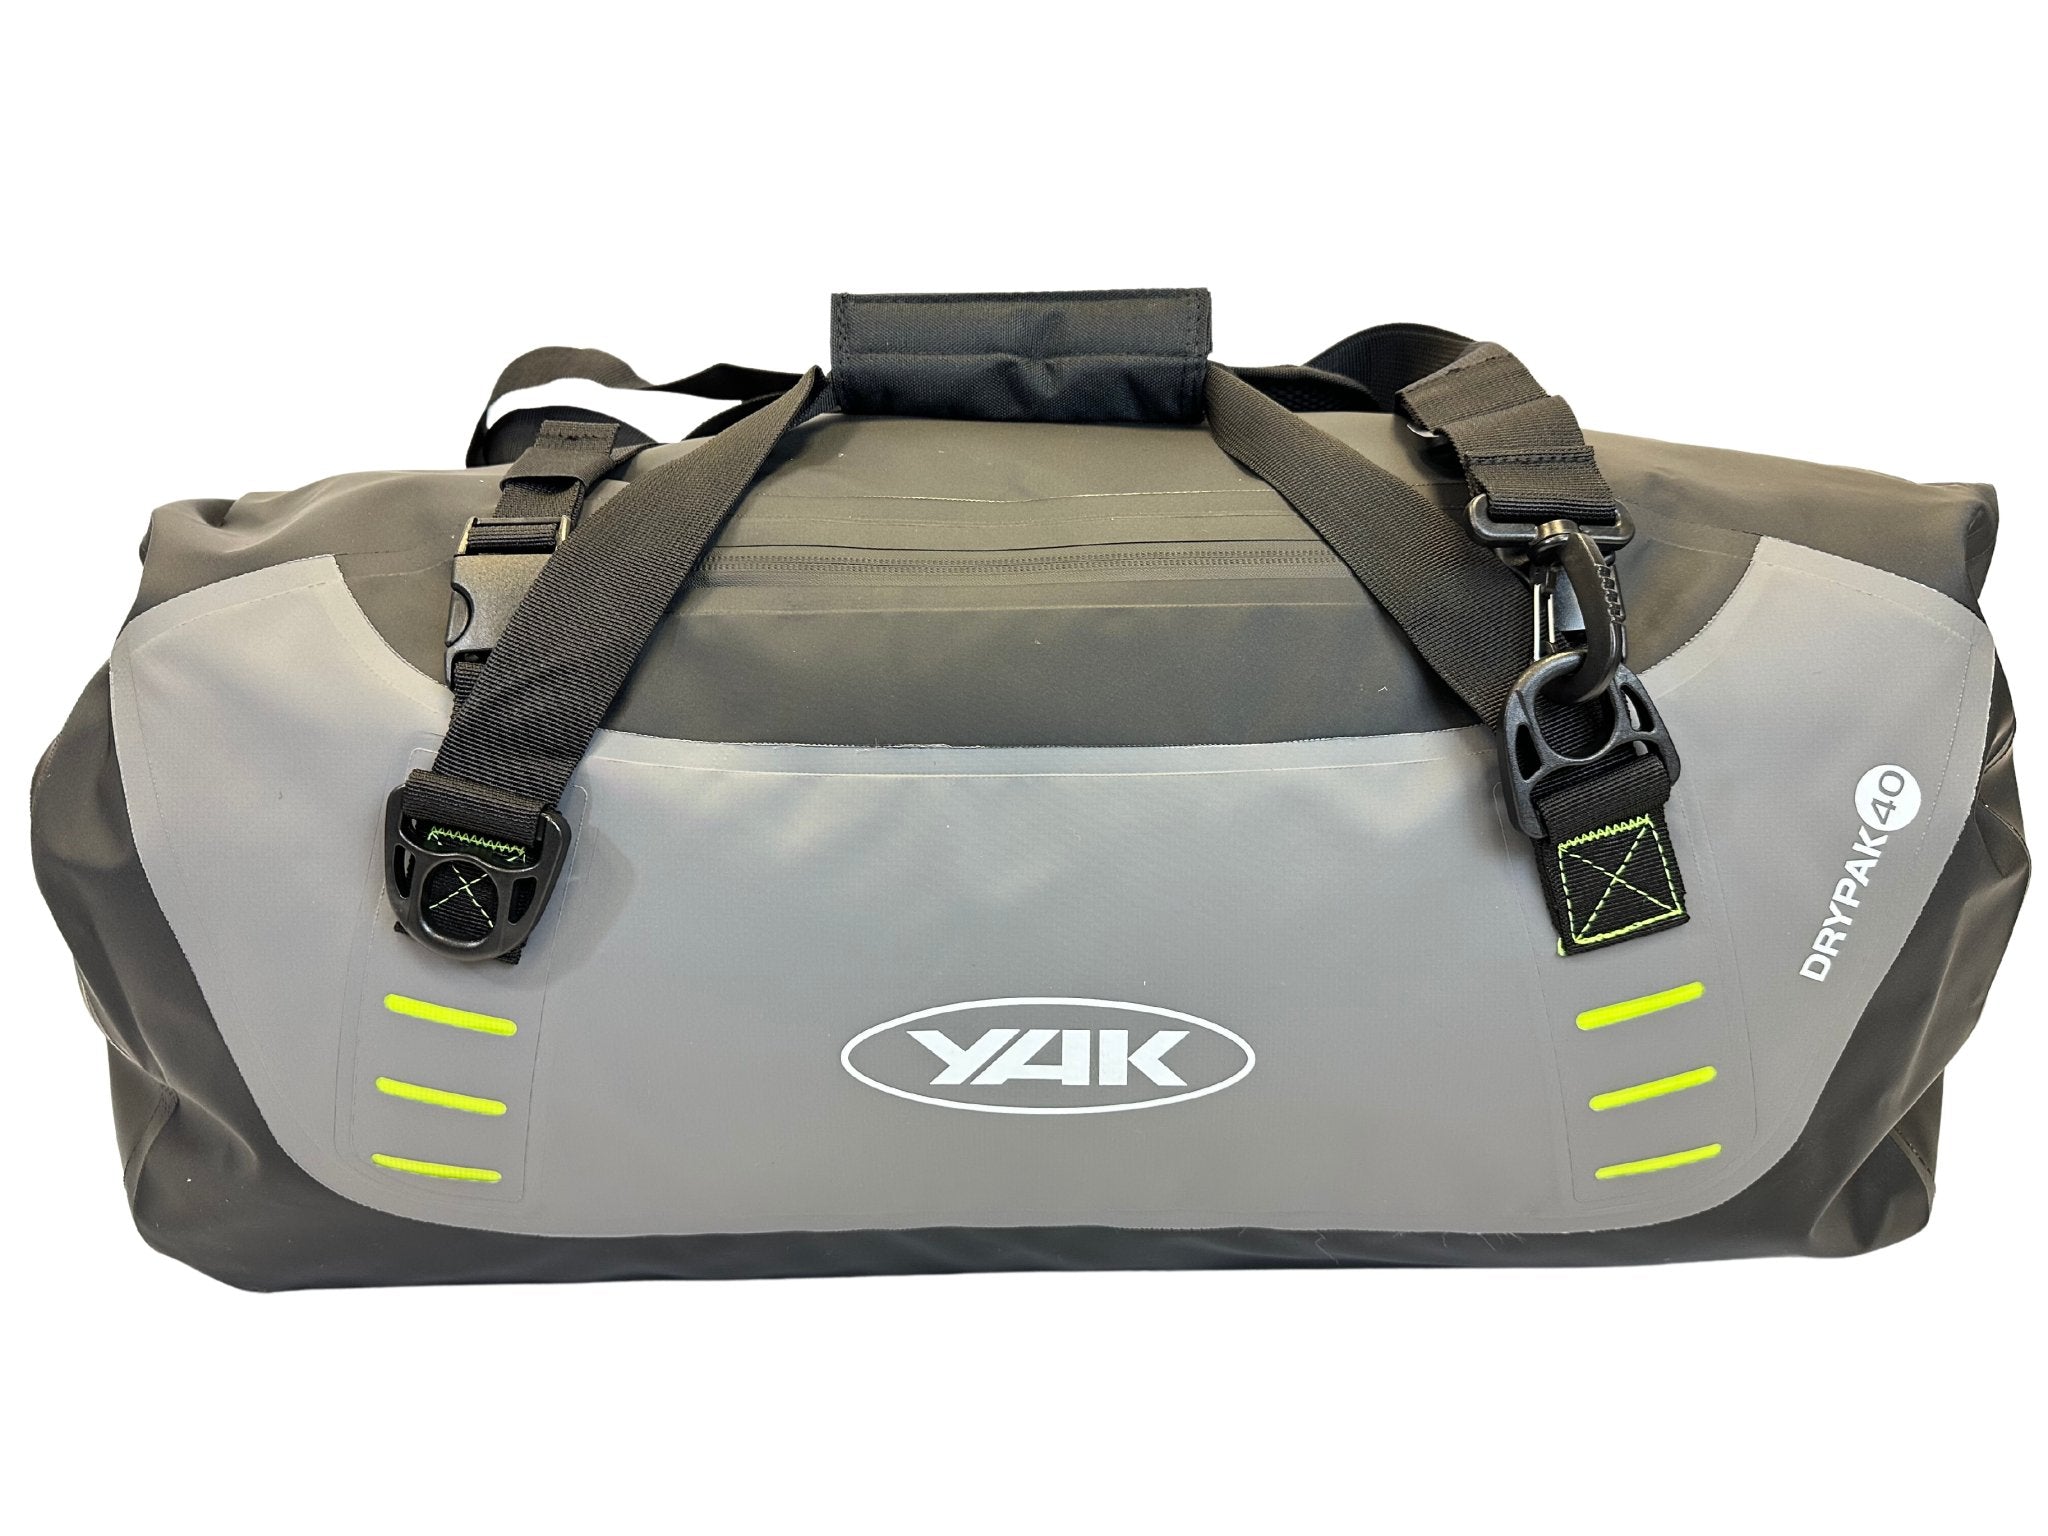 Yak Dry Bag Holdalls with MOLLE - Worthing Watersports - 7003338 - Dry Bags - YAK